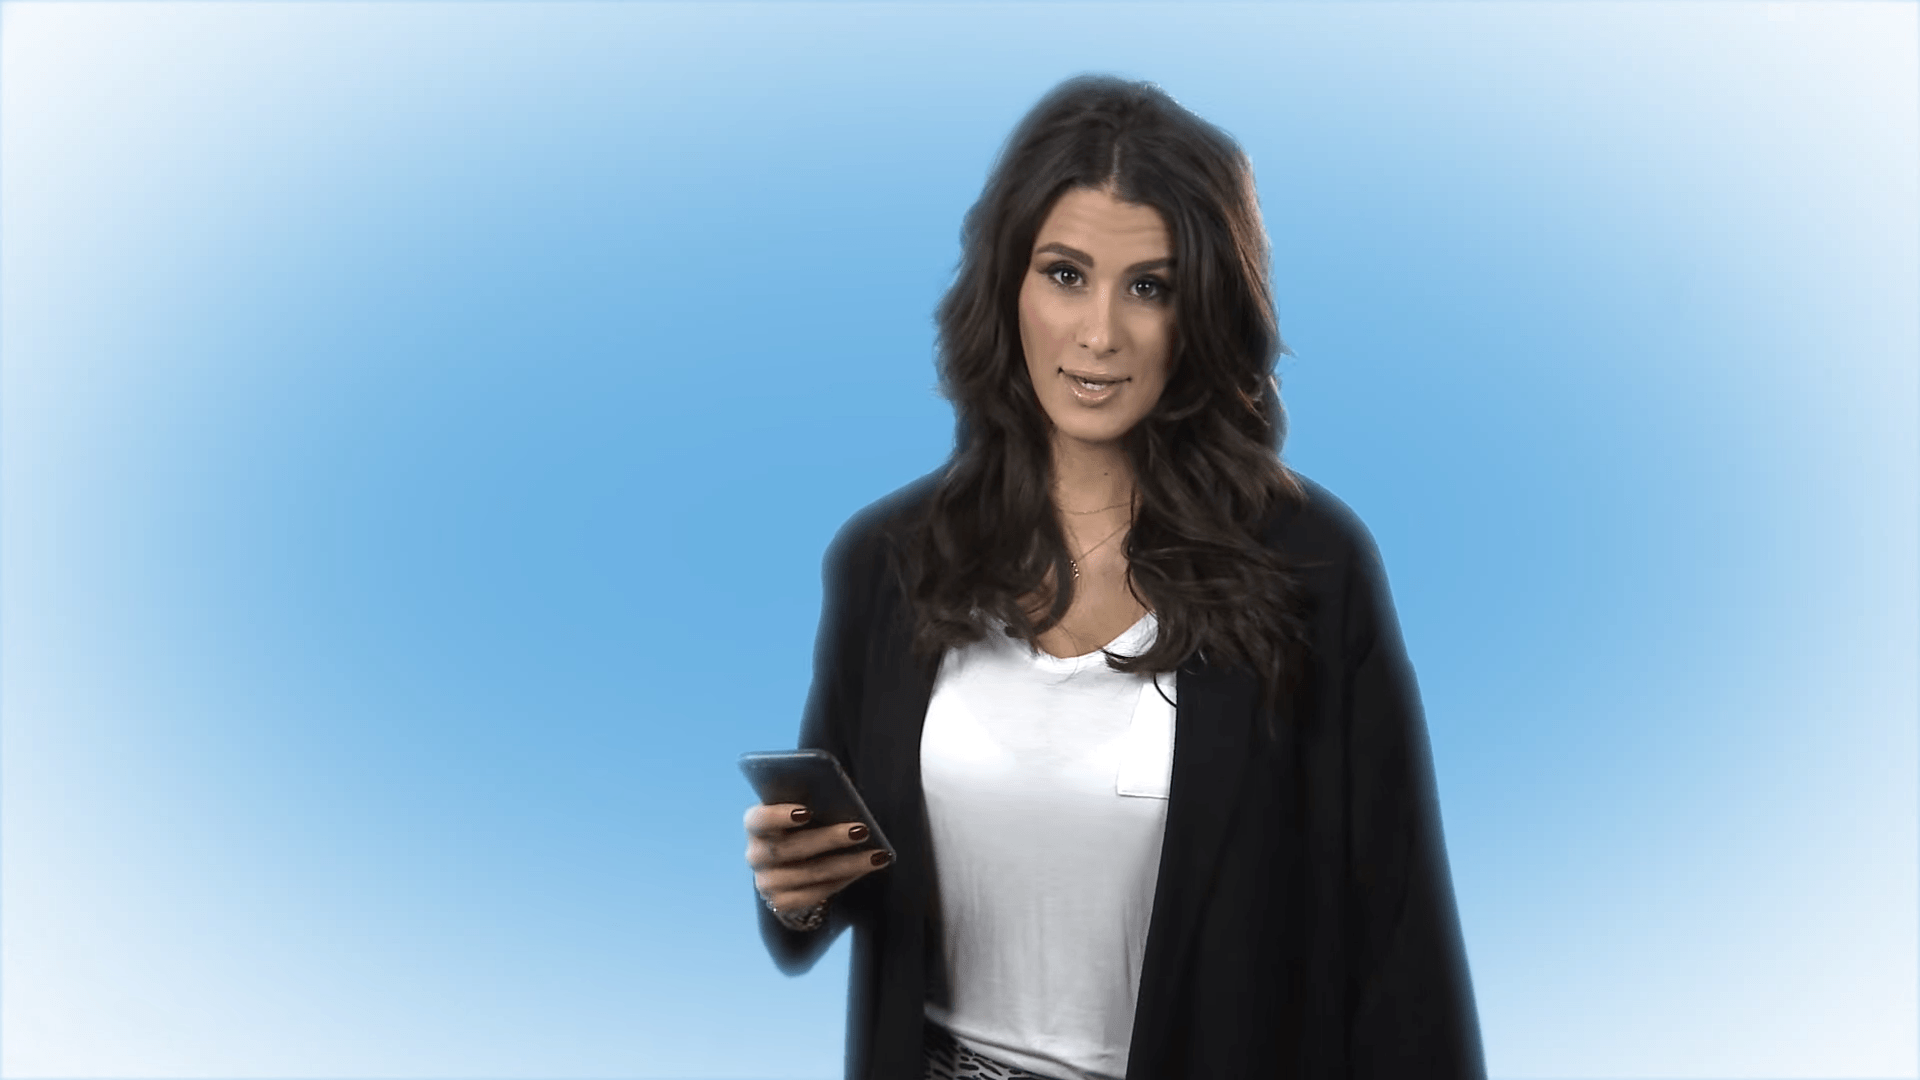 Brittany Furlan Wallpaper Image Photo Picture Background